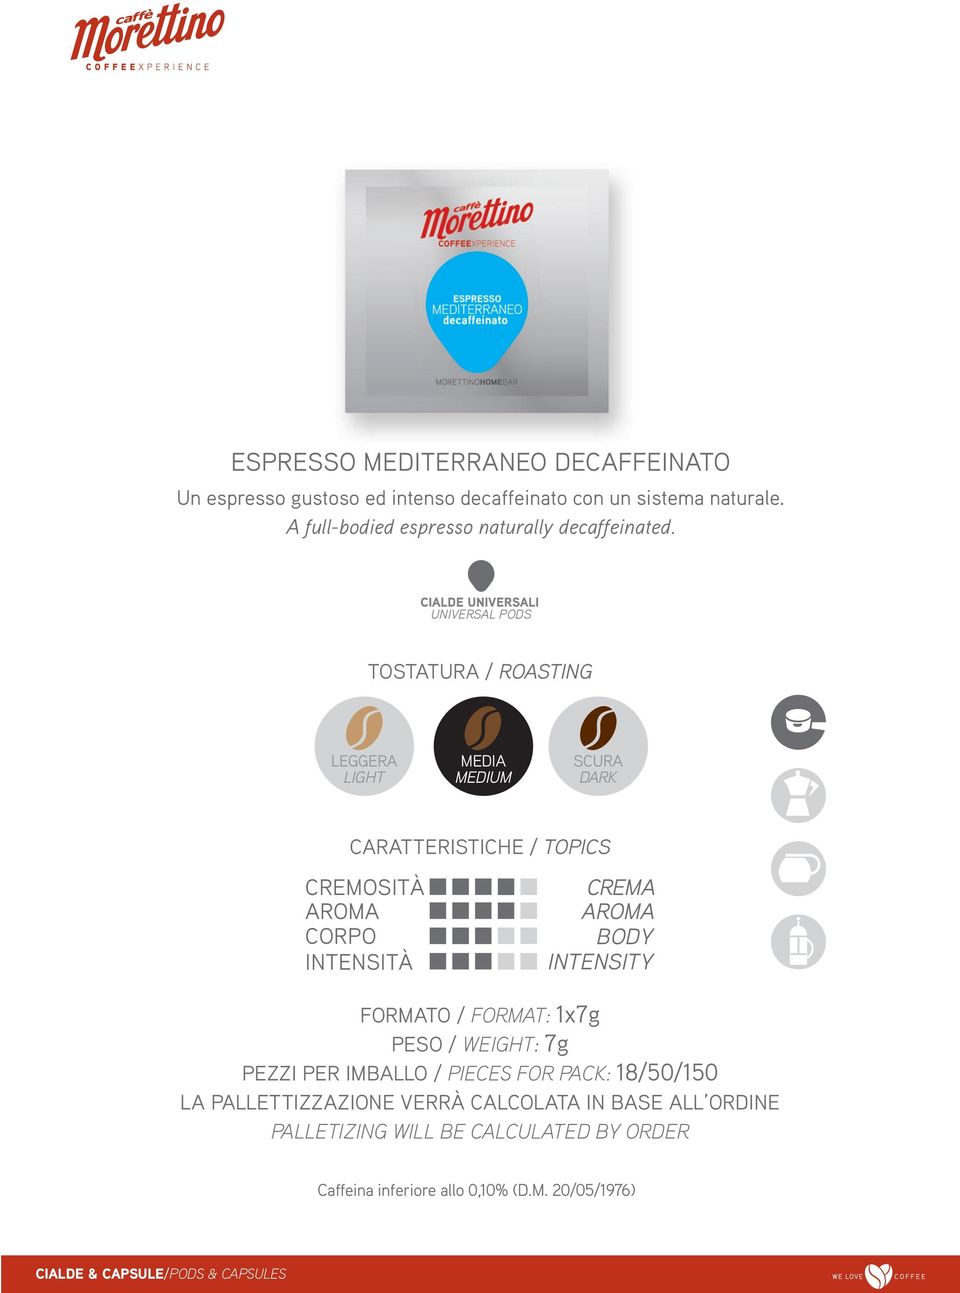 A full-bodied espresso naturally decaffeinated.